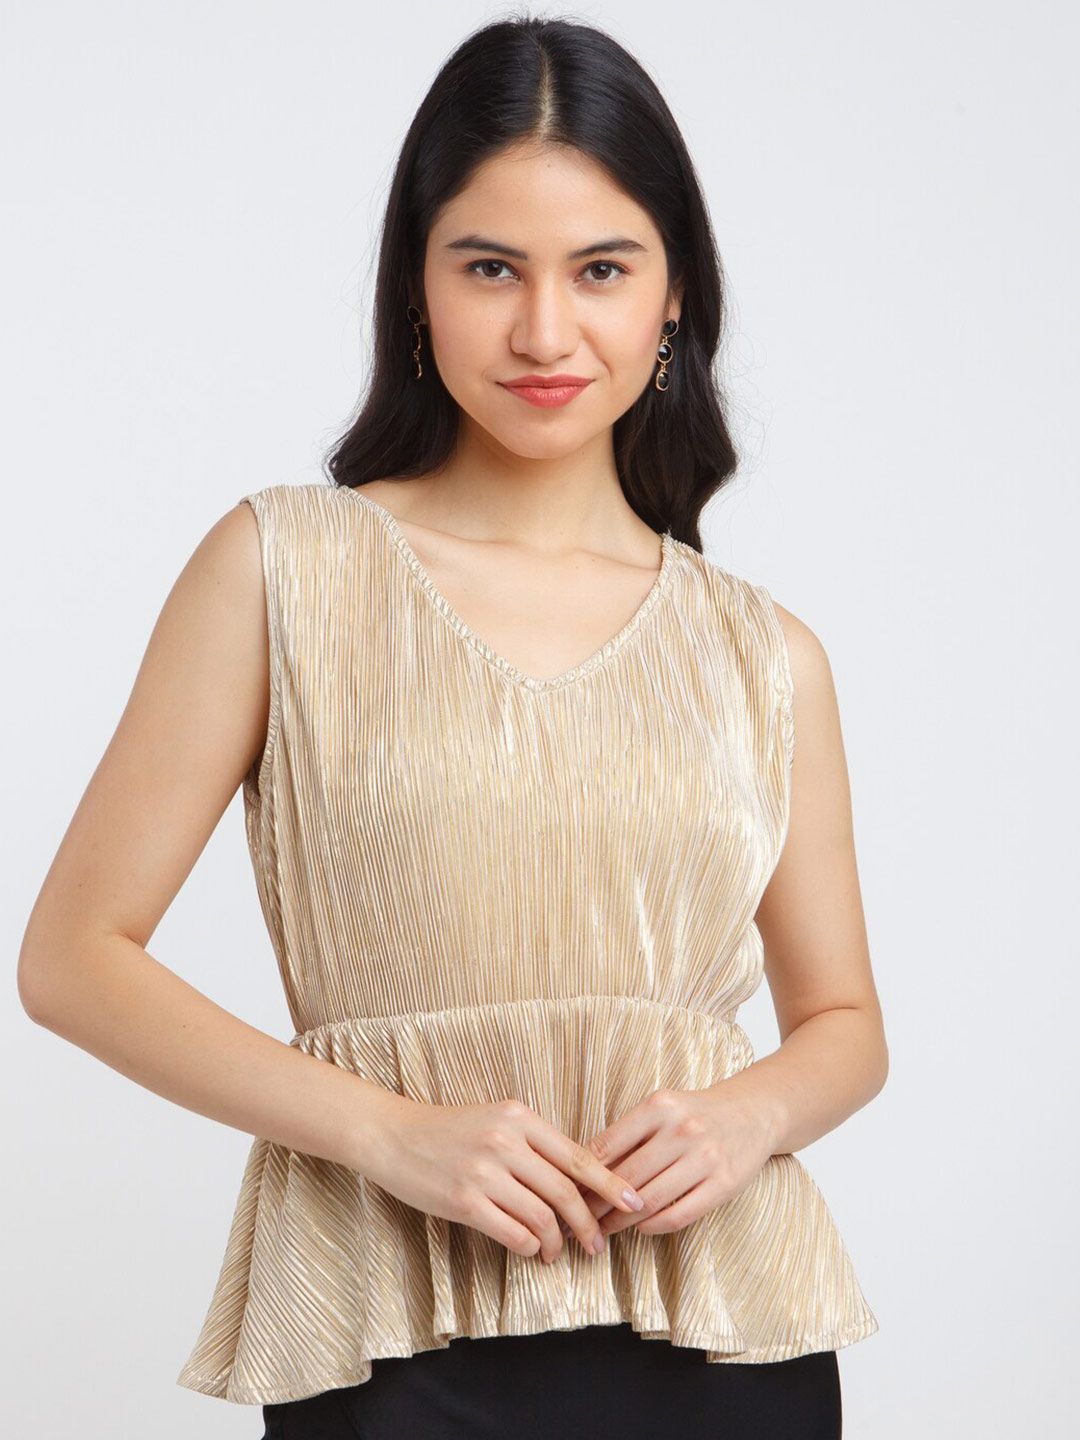 Zink London Women's Gold-Toned Striped Peplum Top Price in India